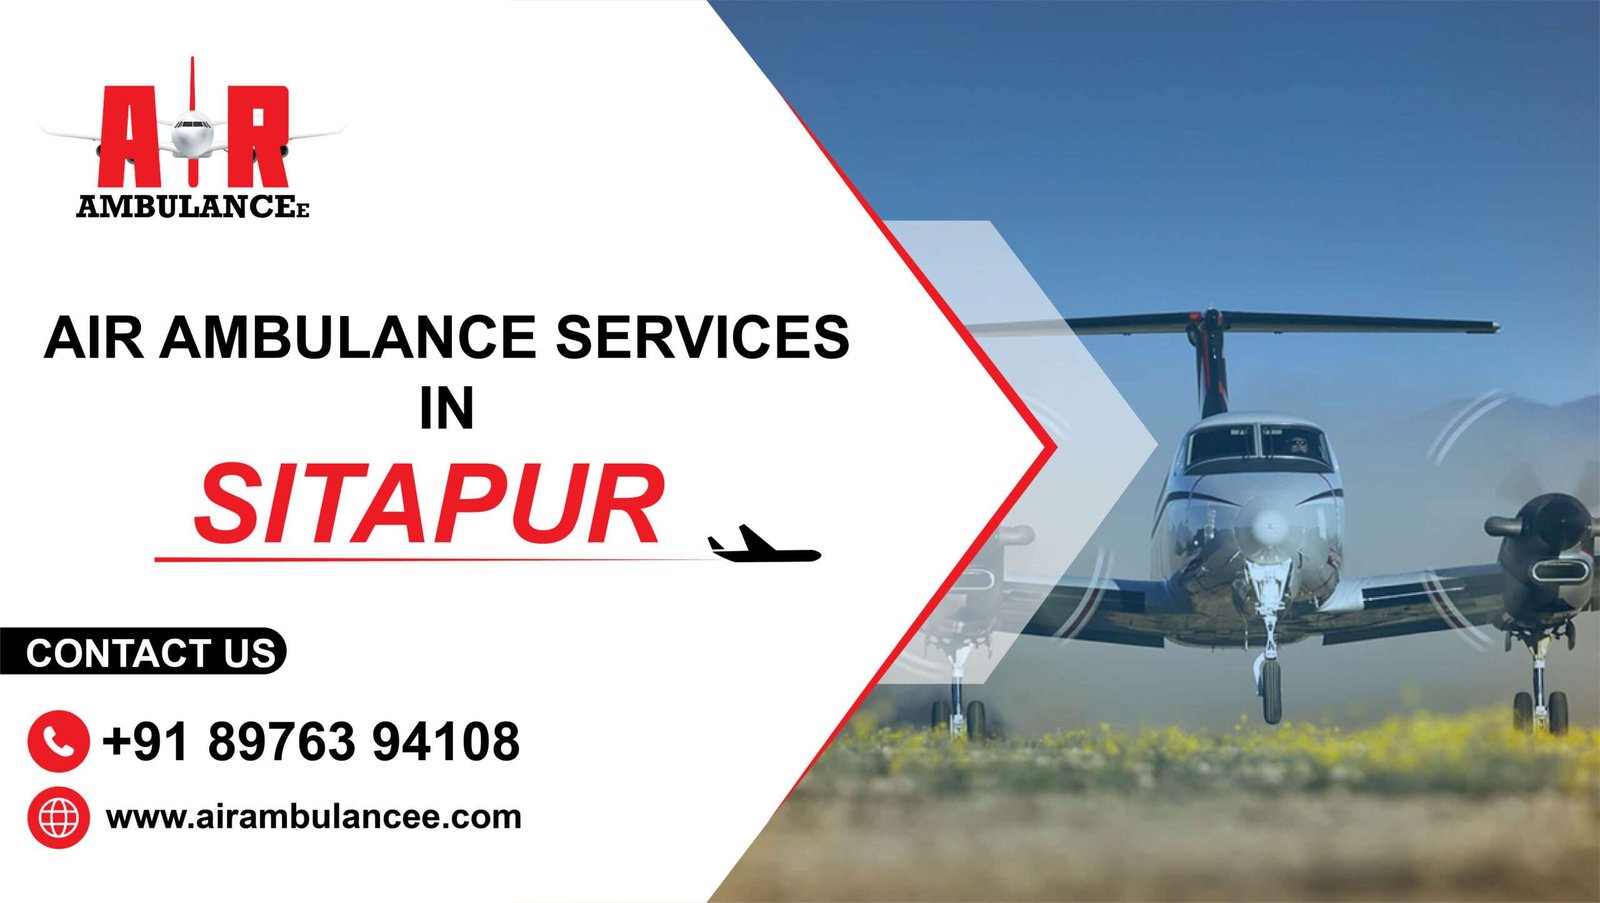 Air Ambulance Services In Sitapur